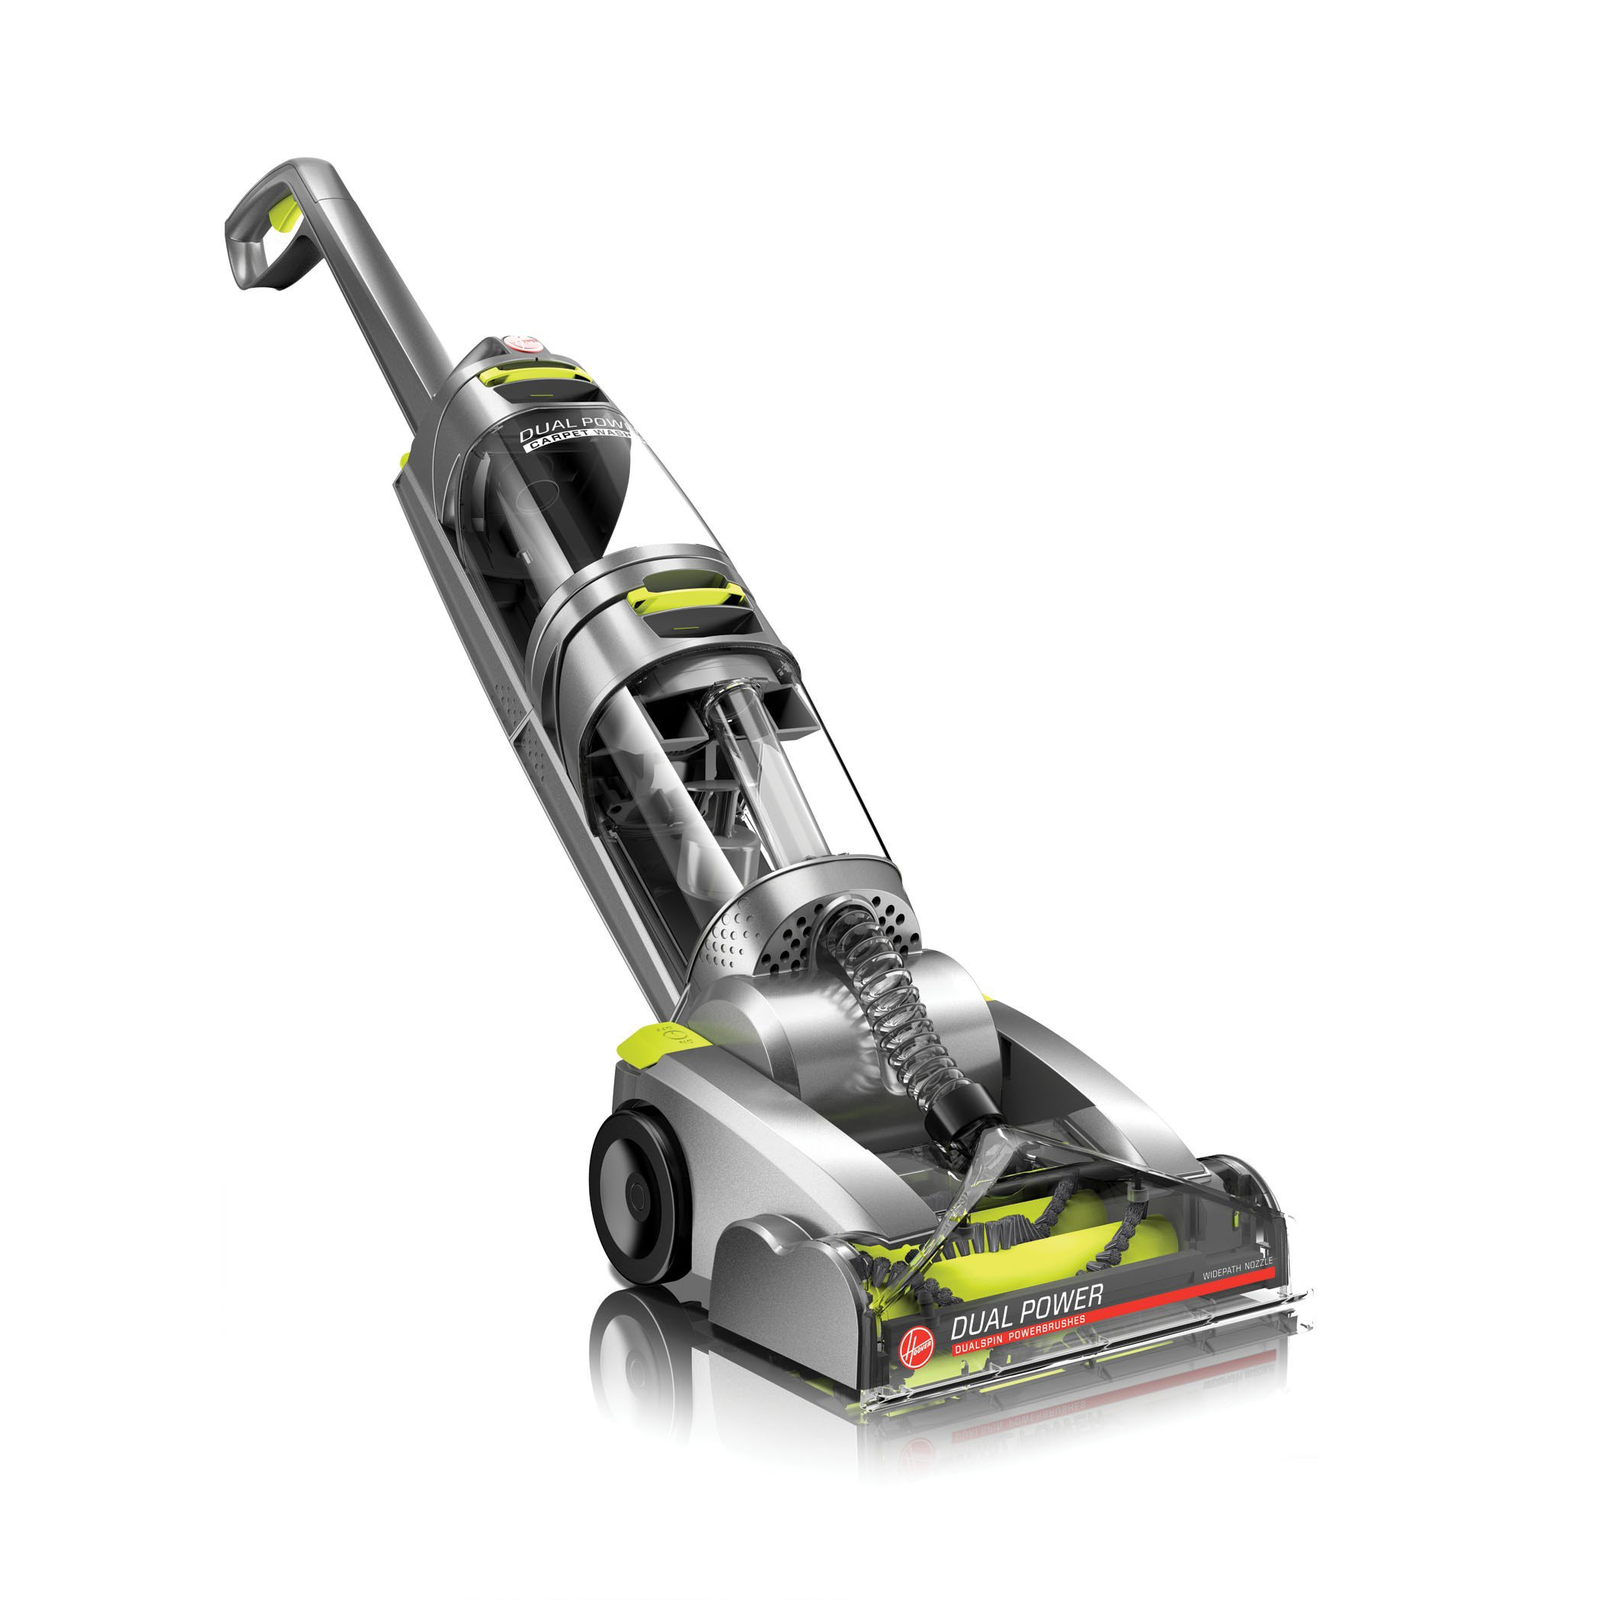 Hoover Dual Power Upright Carpet Cleaner, -FH50900 - image 4 of 6